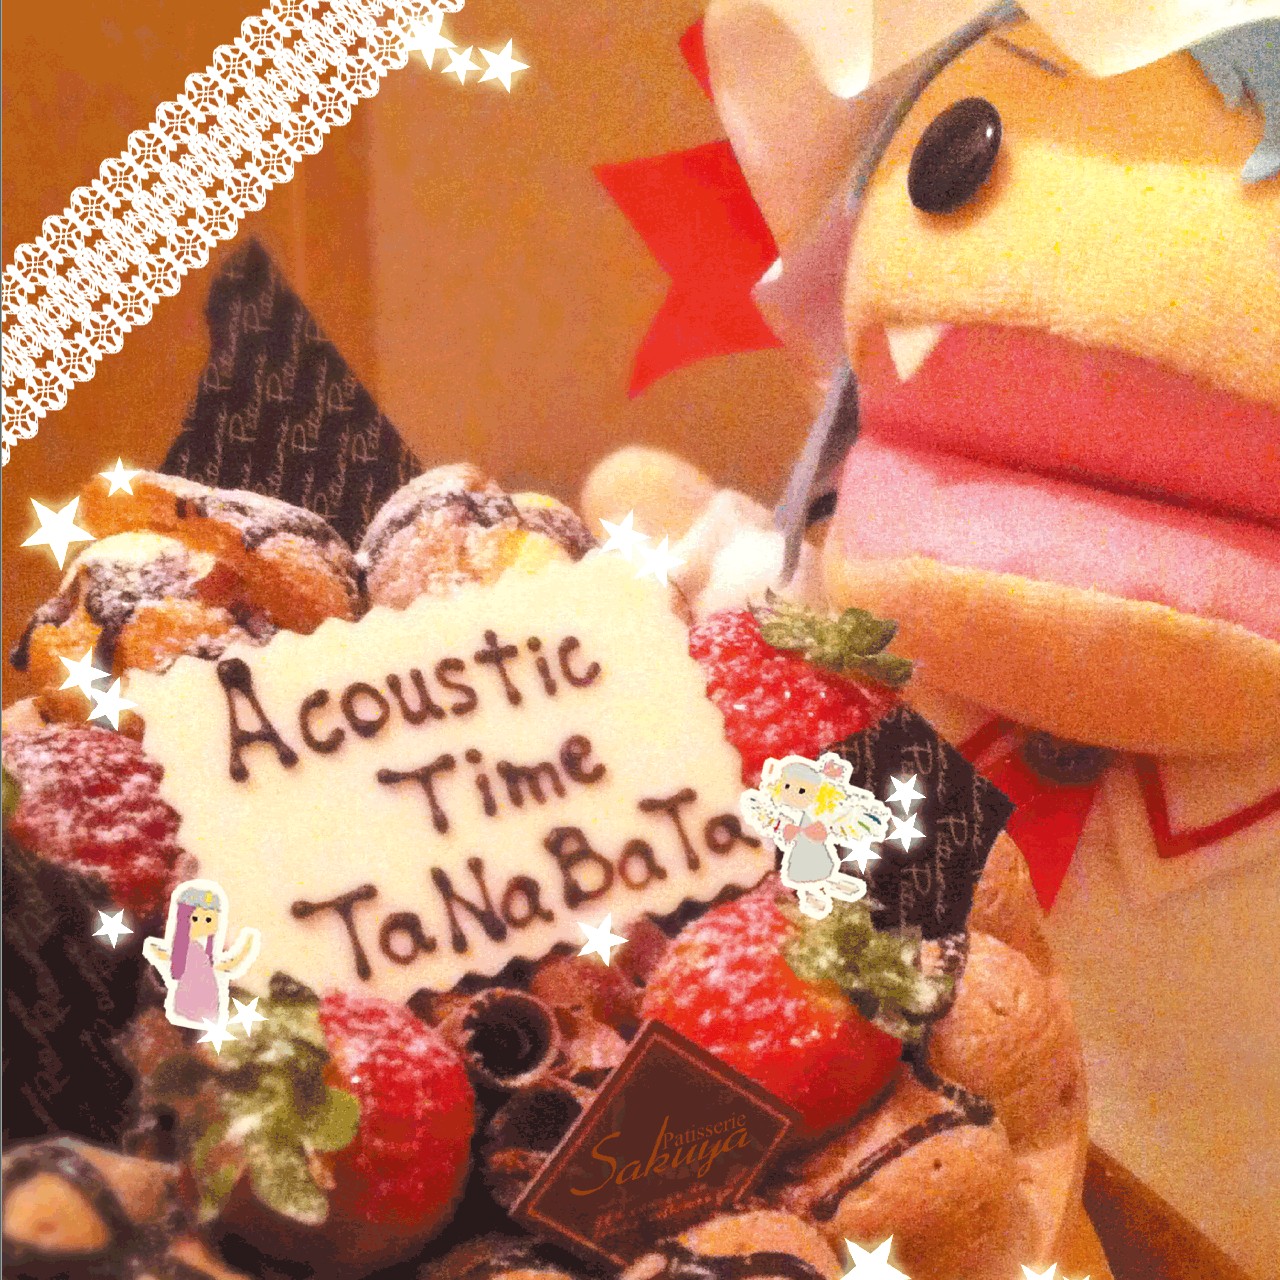 《Acoustic Time》